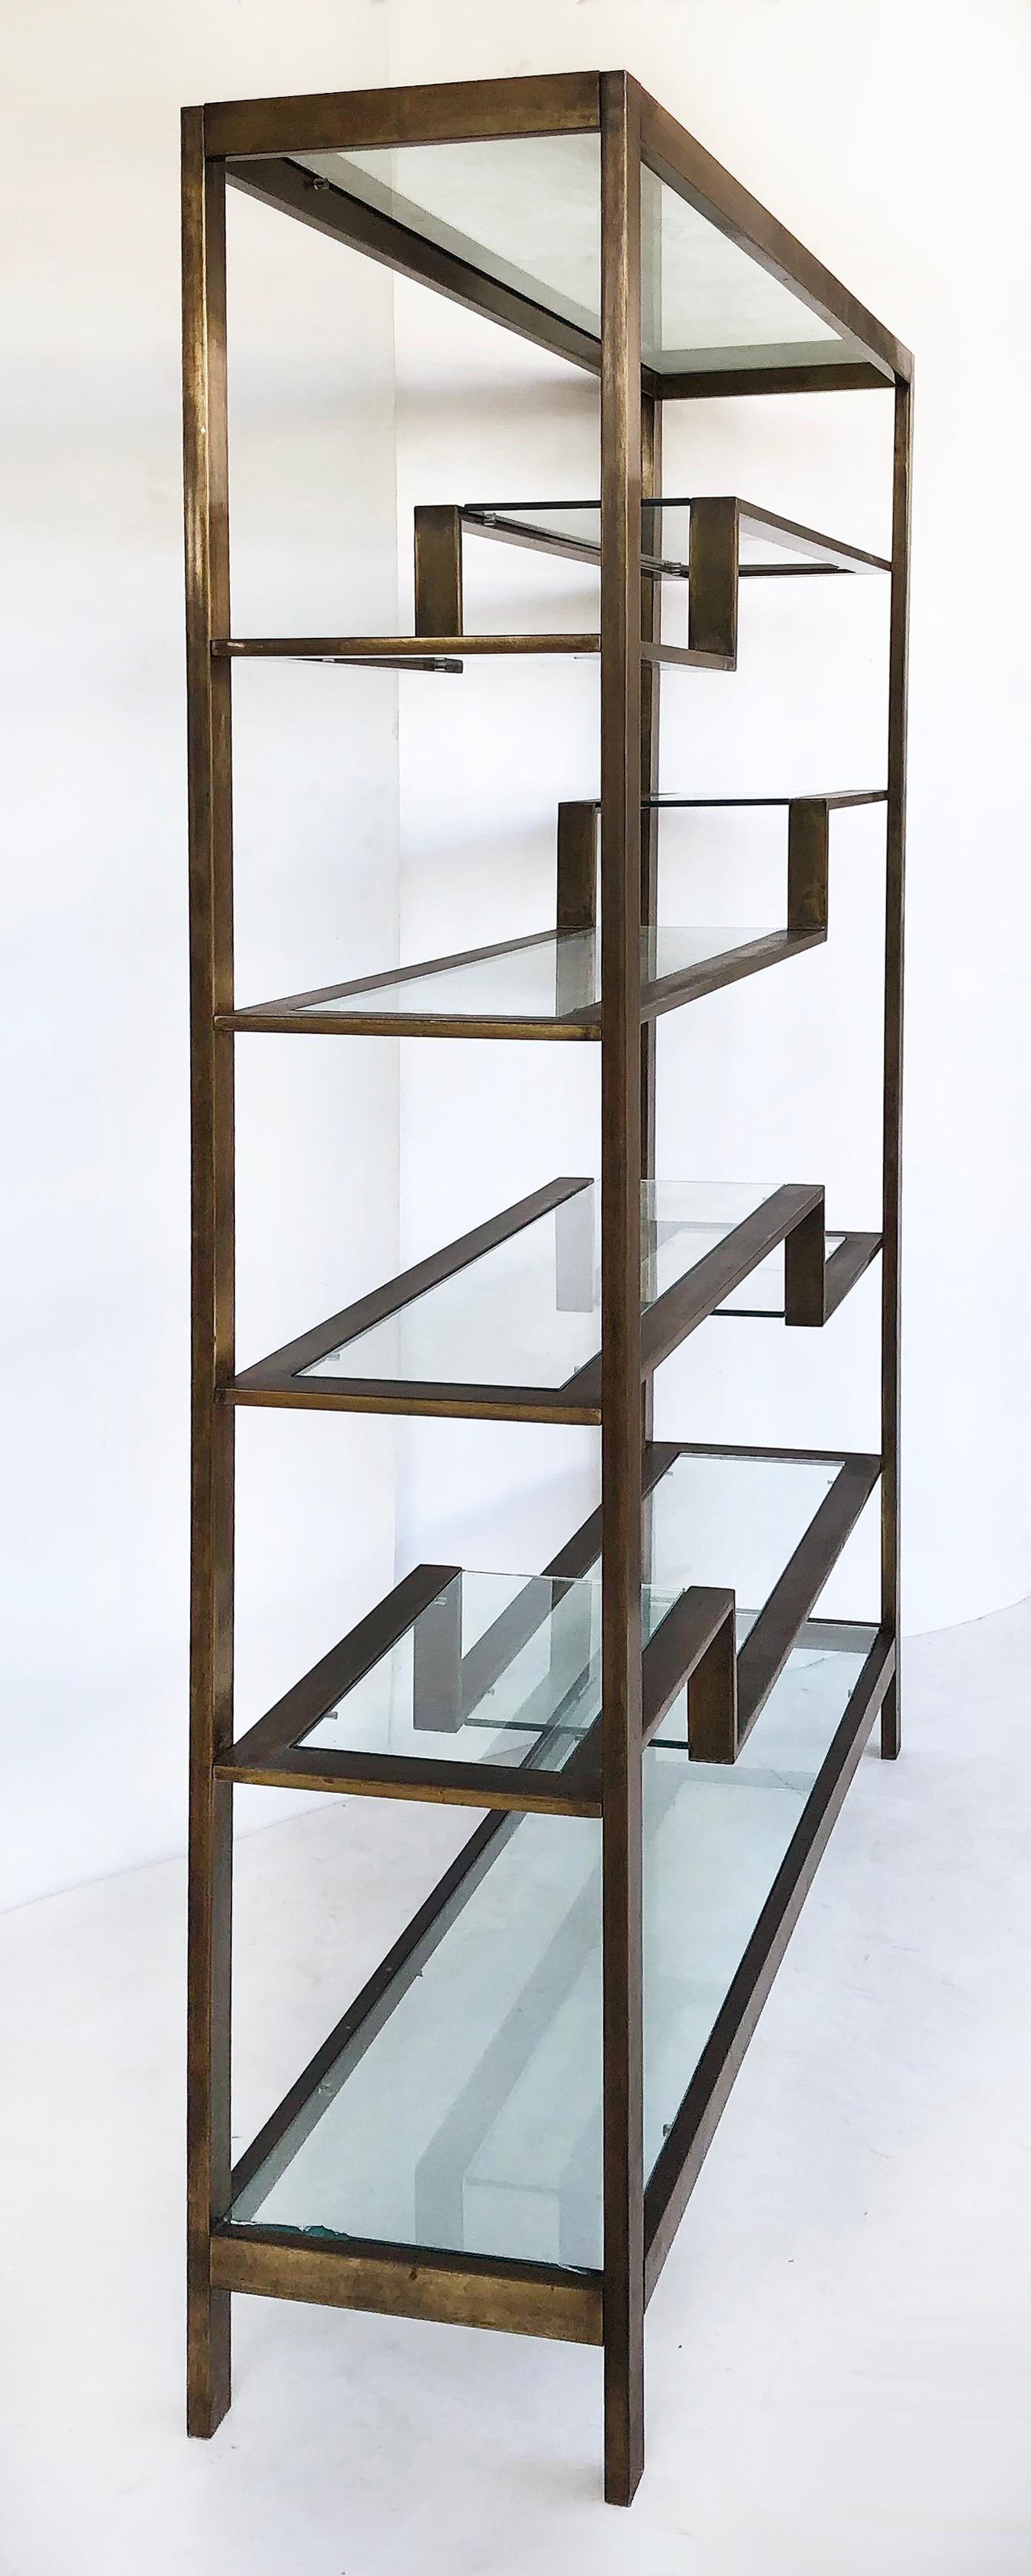 American Bronzed Finish Mid-Century Modern Etagere Metal Shelving with Glass Shelves